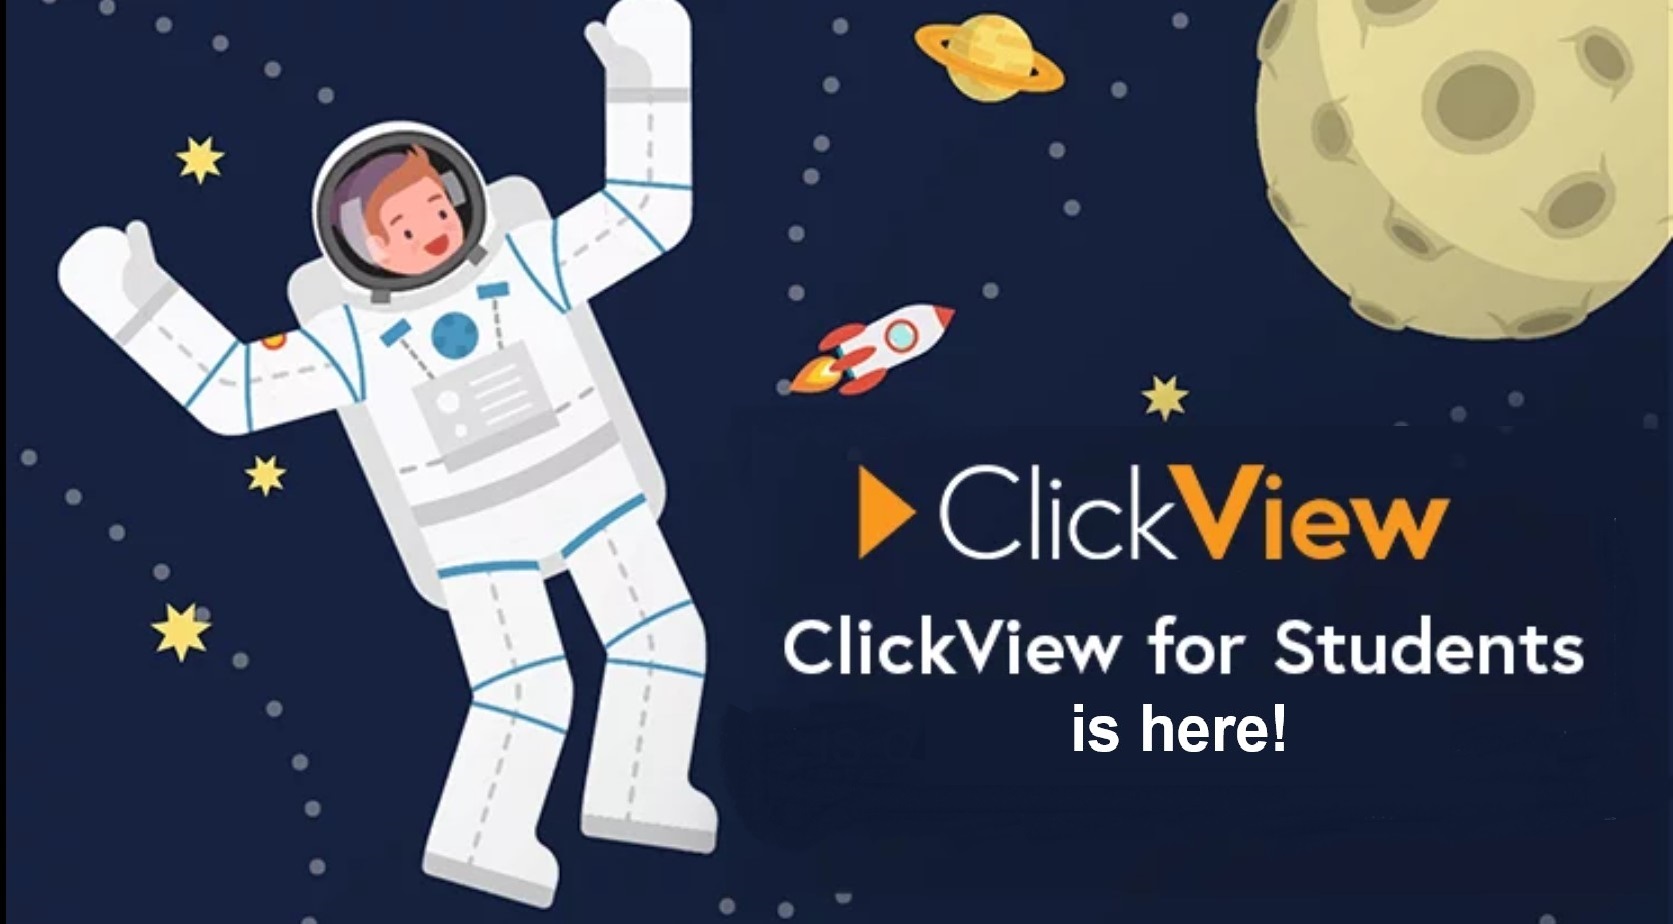 ClickView is here!